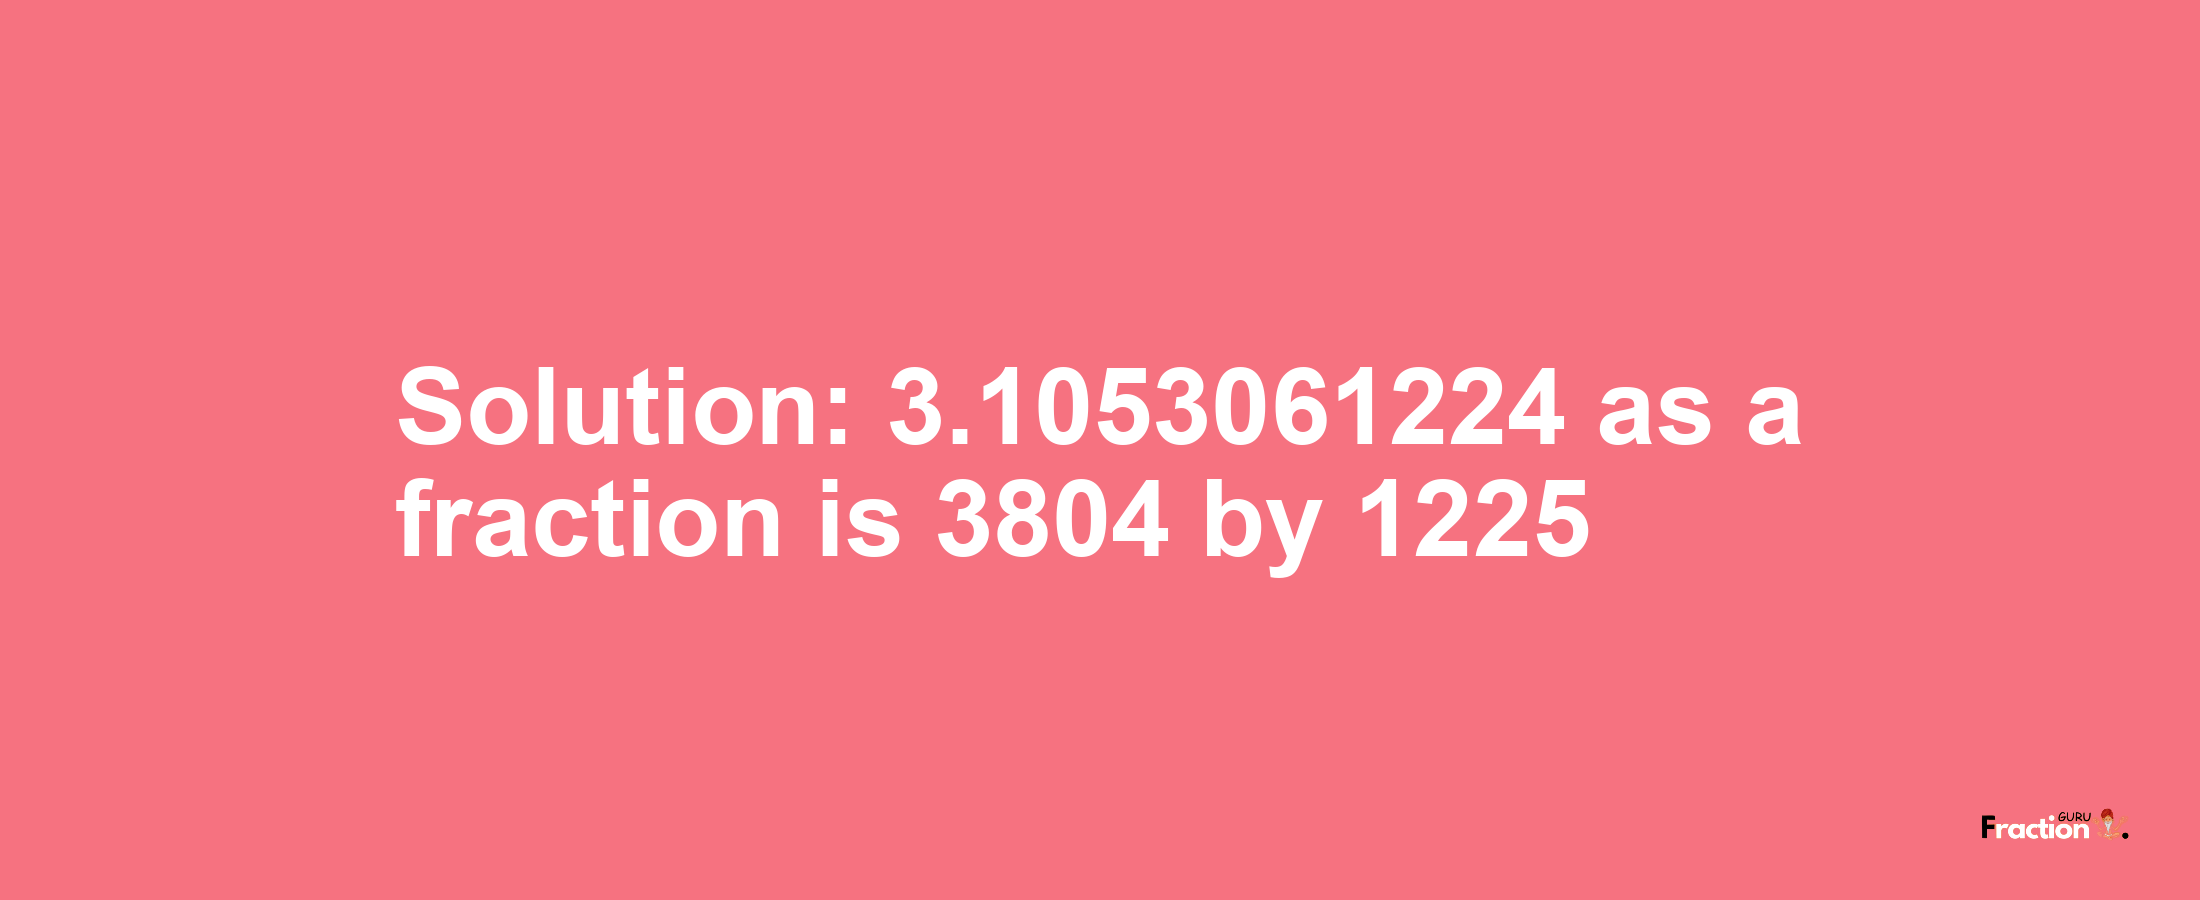 Solution:3.1053061224 as a fraction is 3804/1225